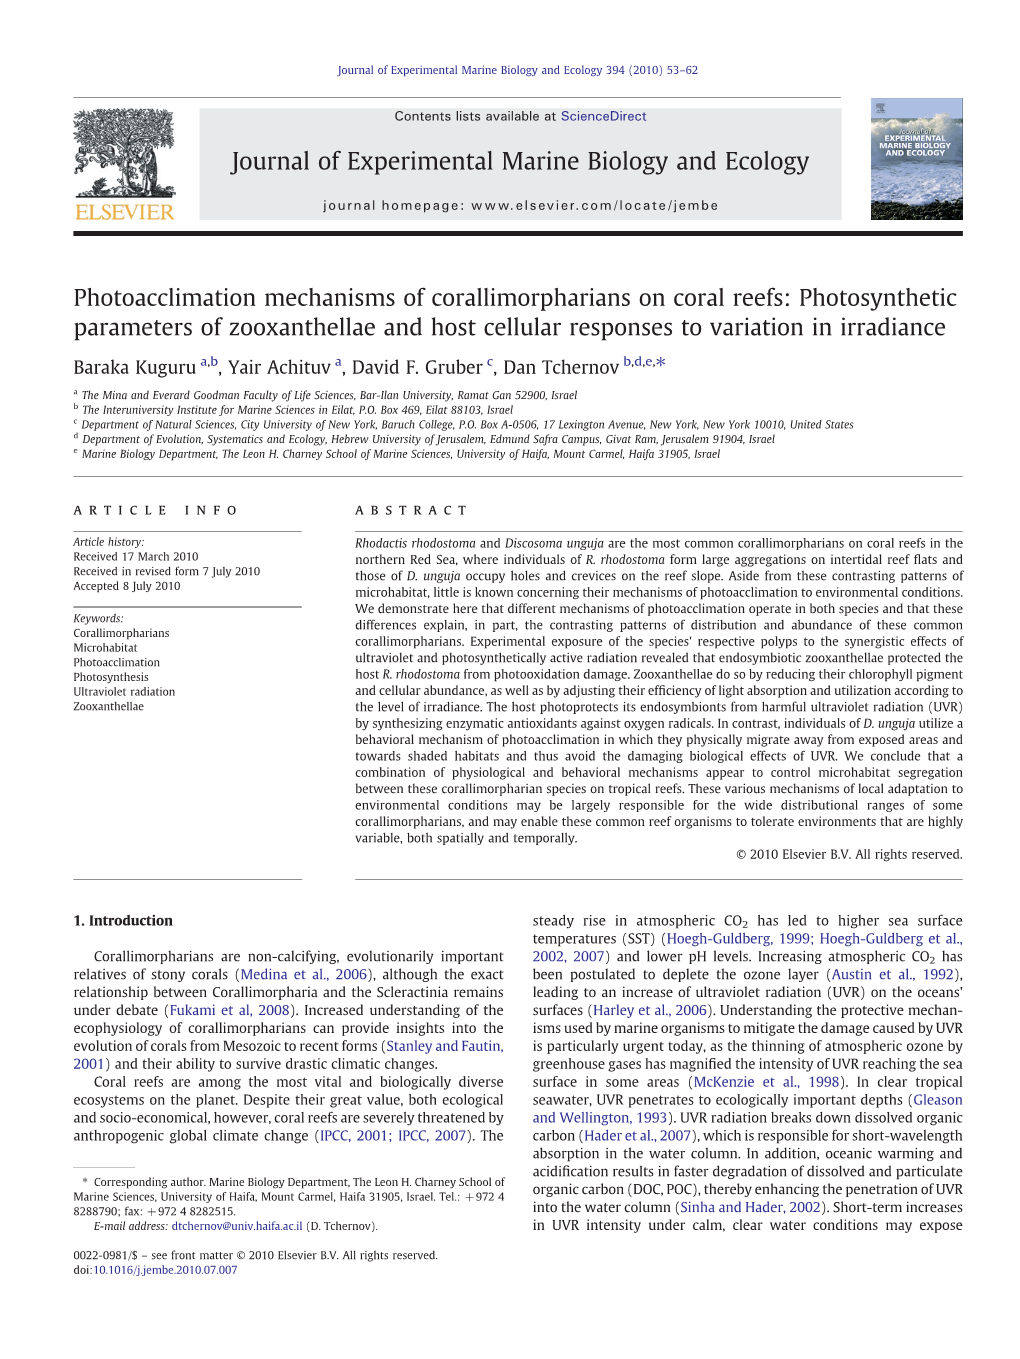 Photoacclimation Mechanisms of Corallimorpharians on Coral Reefs: Photosynthetic Parameters of Zooxanthellae and Host Cellular Responses to Variation in Irradiance